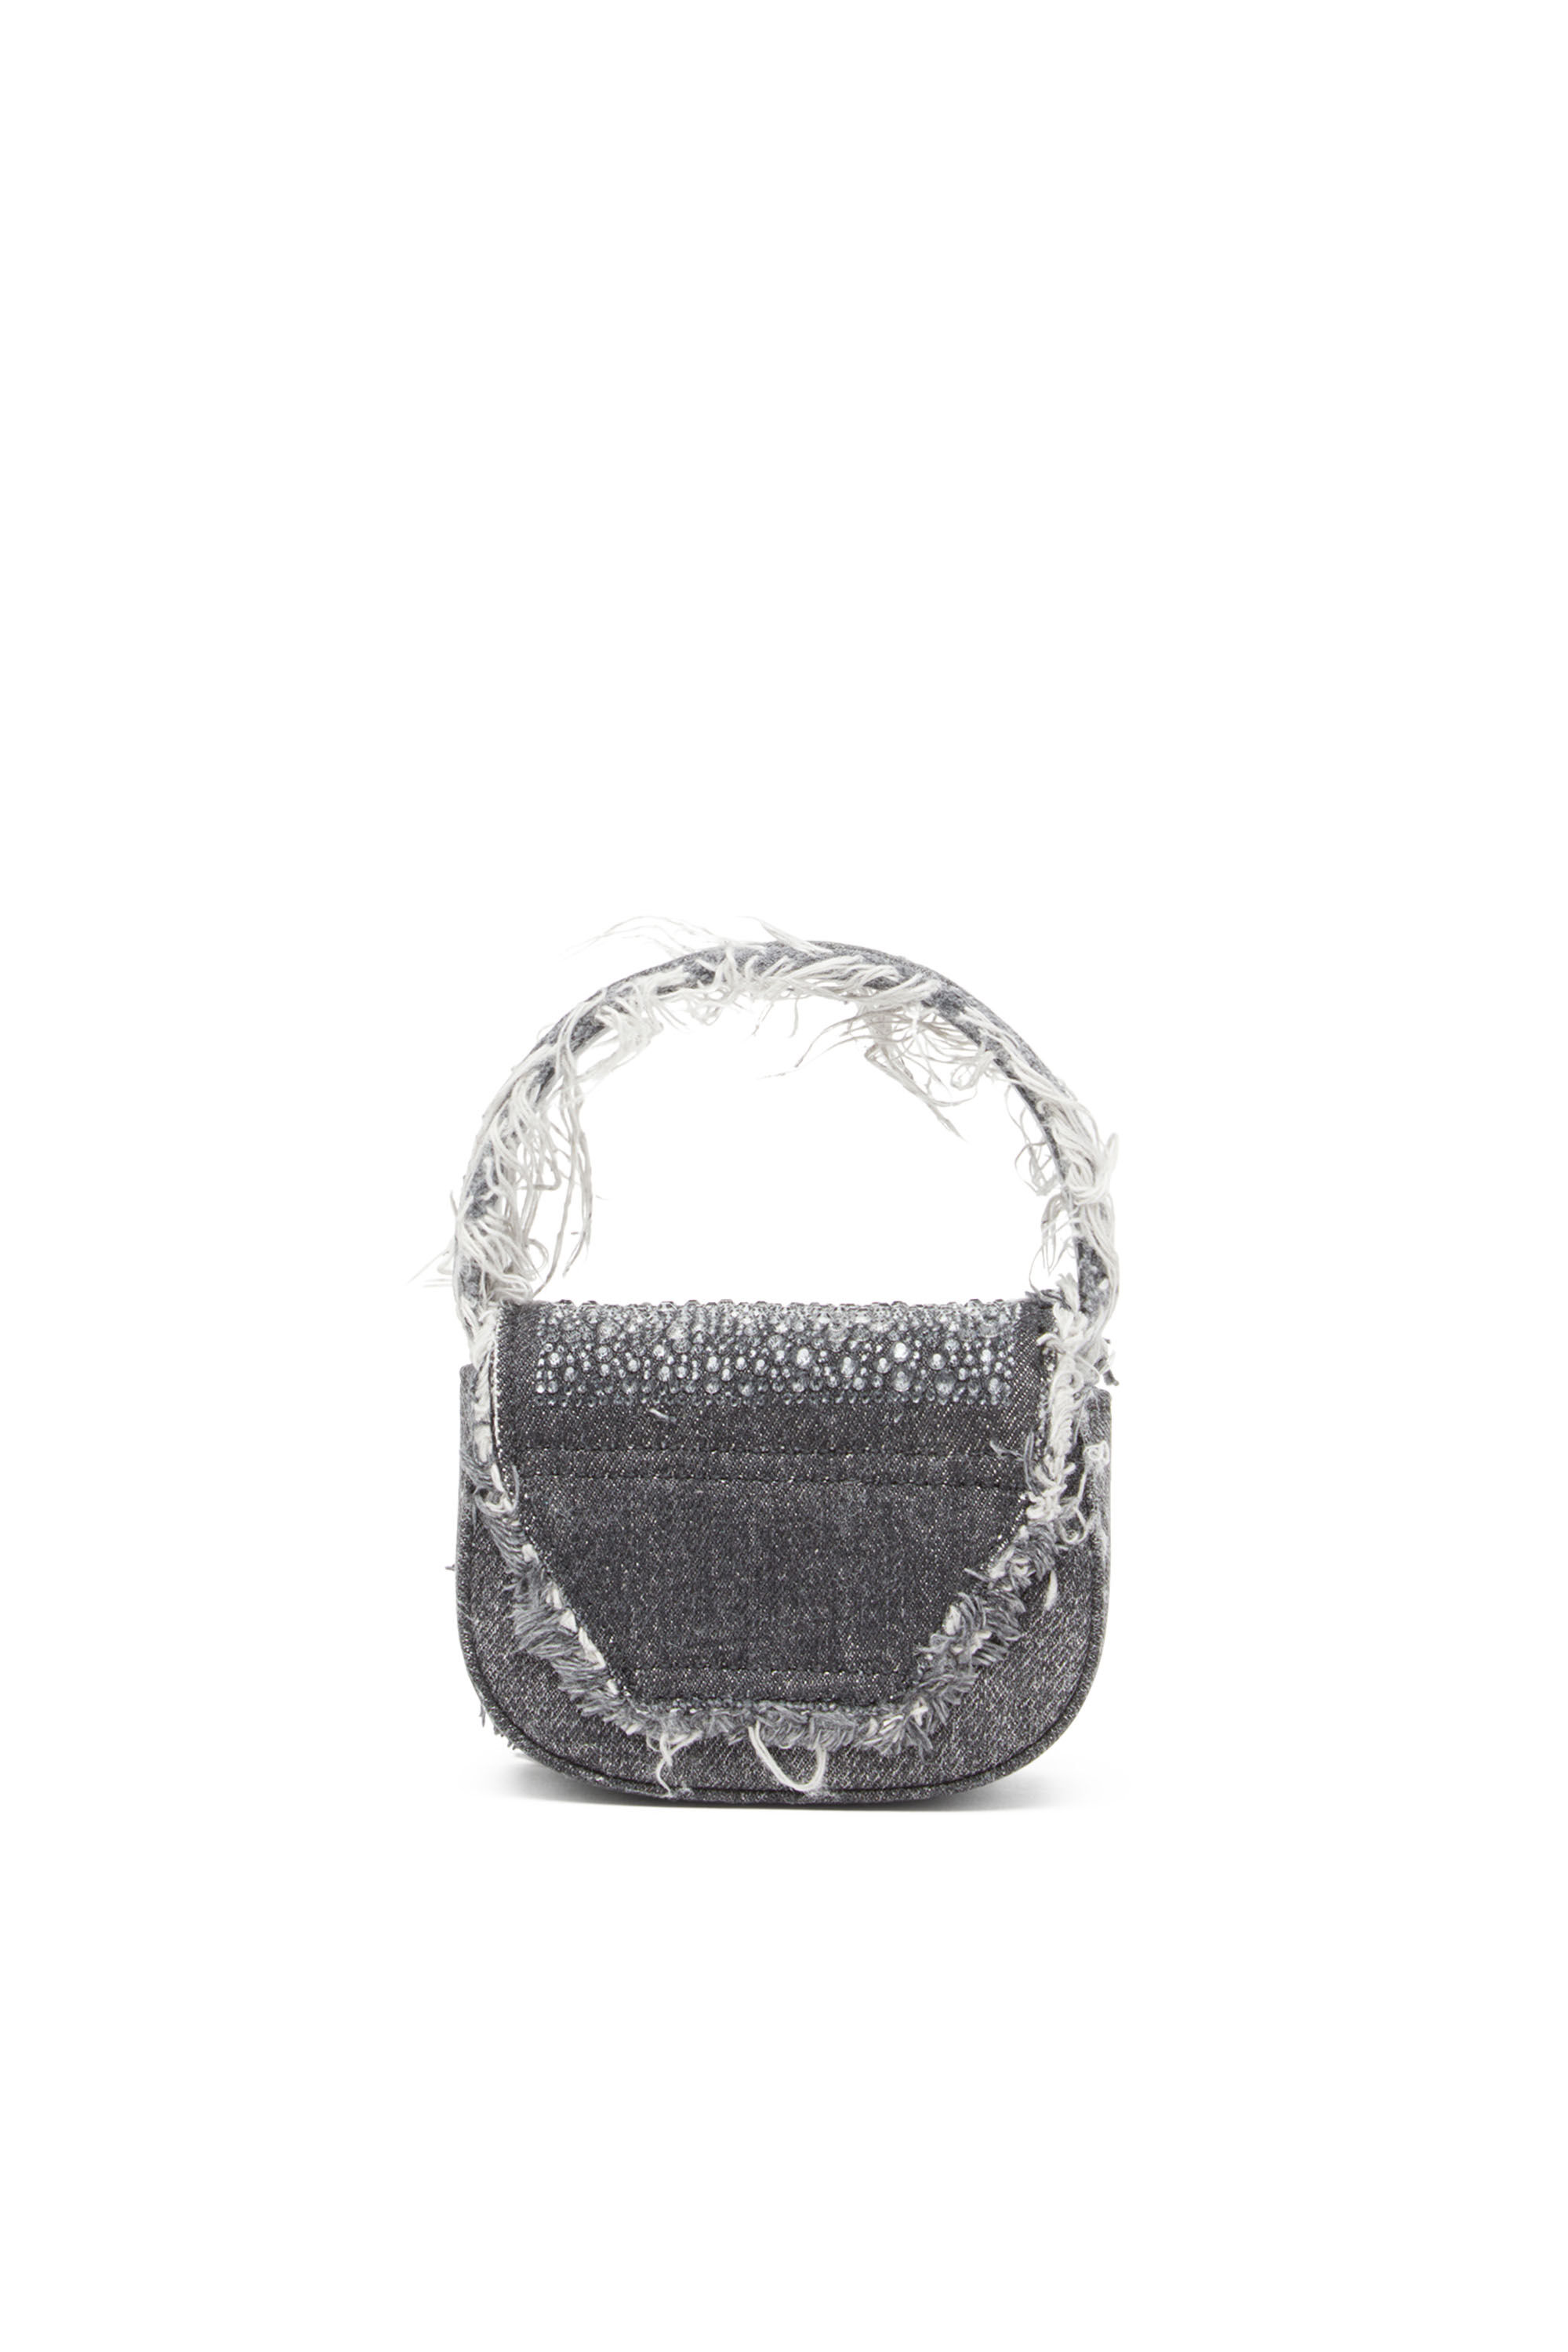 Diesel - 1DR XS, Woman 1DR XS-Iconic mini bag in denim and crystals in Black - Image 3